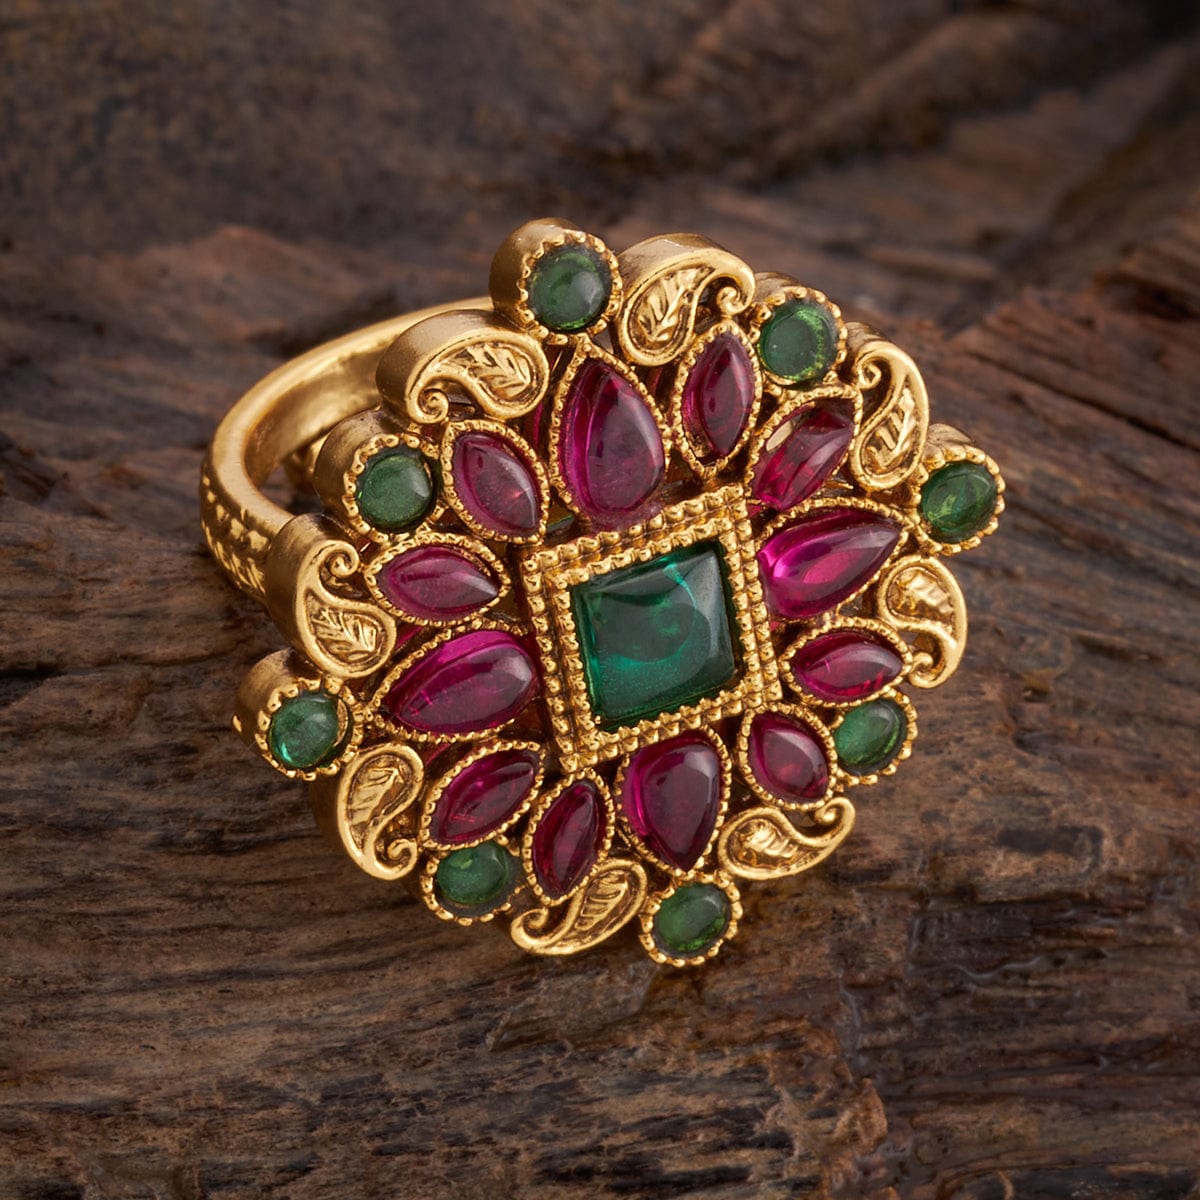 ACCESSHER Gold Plated Antique Jewellery Ruby Stone Studded Statement Oval  Shape Adjustable Finger Ring/Rings for Women and Girls Pack of 1 :  Amazon.in: Fashion